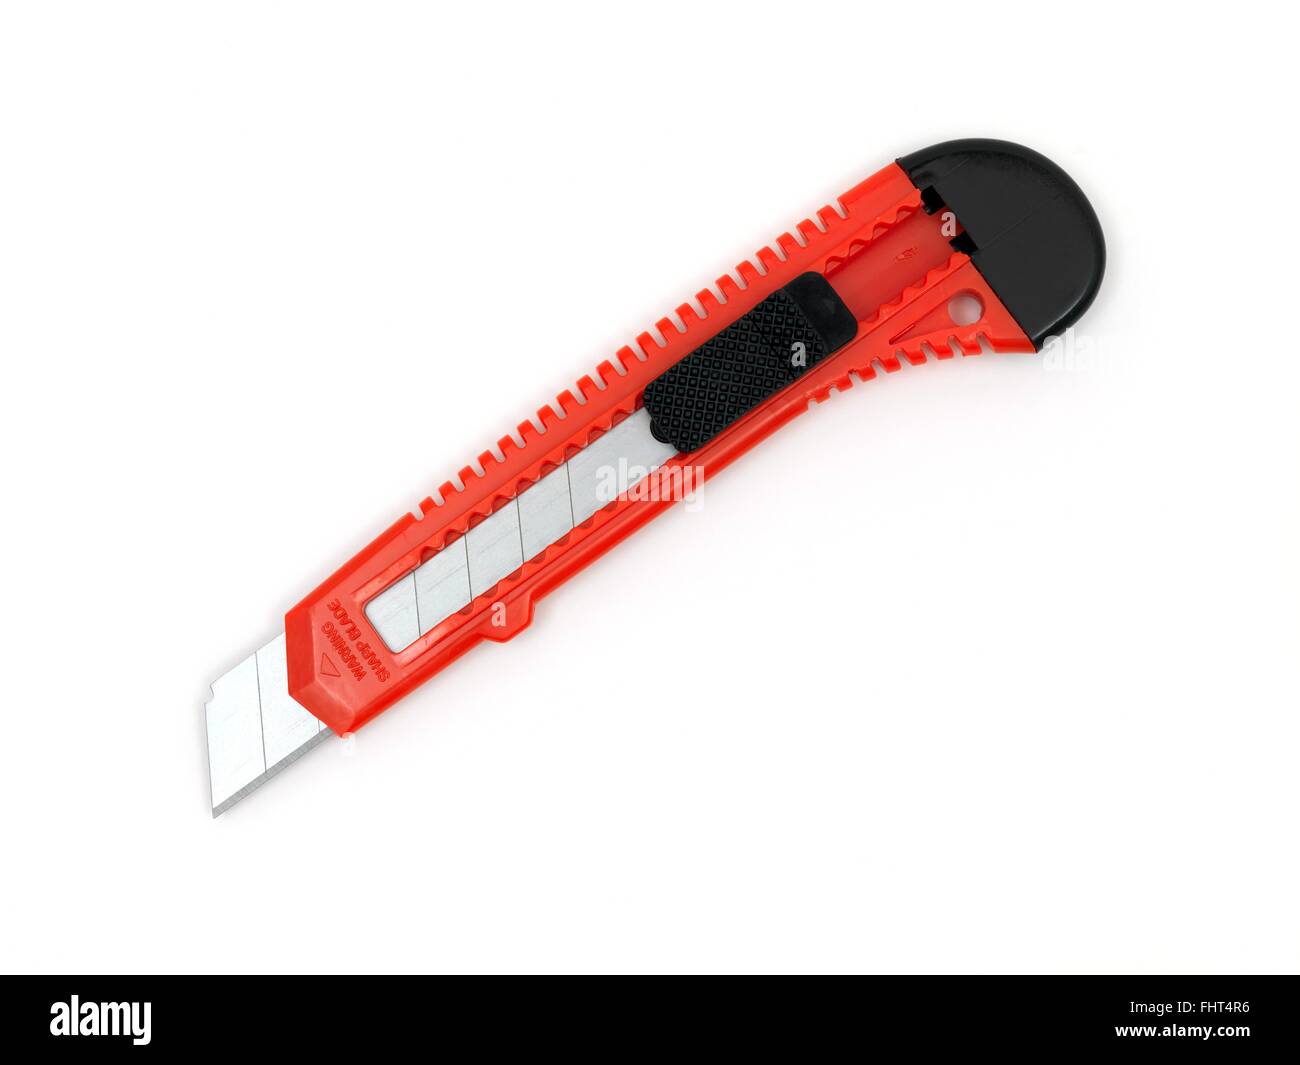 493 Small Box Cutter Knife Images, Stock Photos, 3D objects